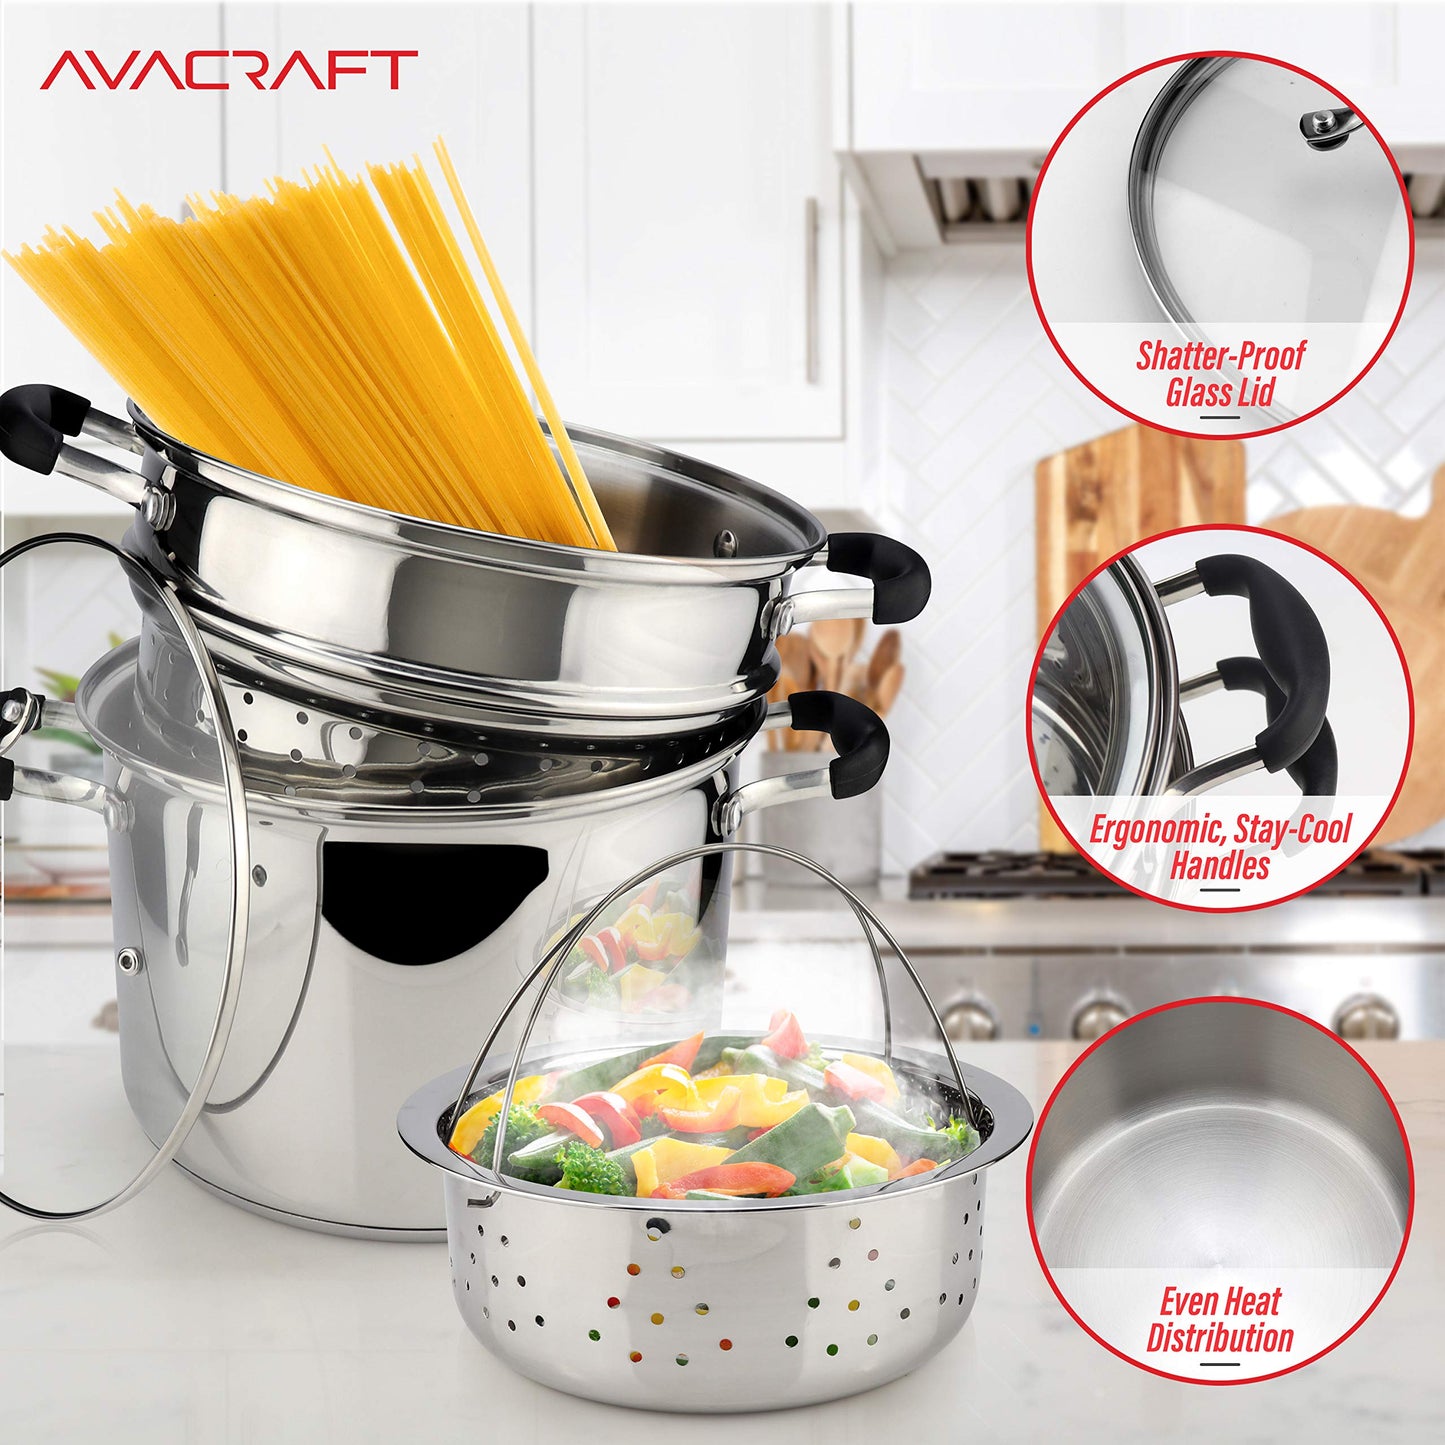 AVACRAFT 18/10 Stainless Steel, 4 Piece Pasta Pot with Strainer Insert, Stock Pot with Steamer Basket and Pasta Pot Insert, Pasta Cooker Set with Glass Lid, 7 Quart